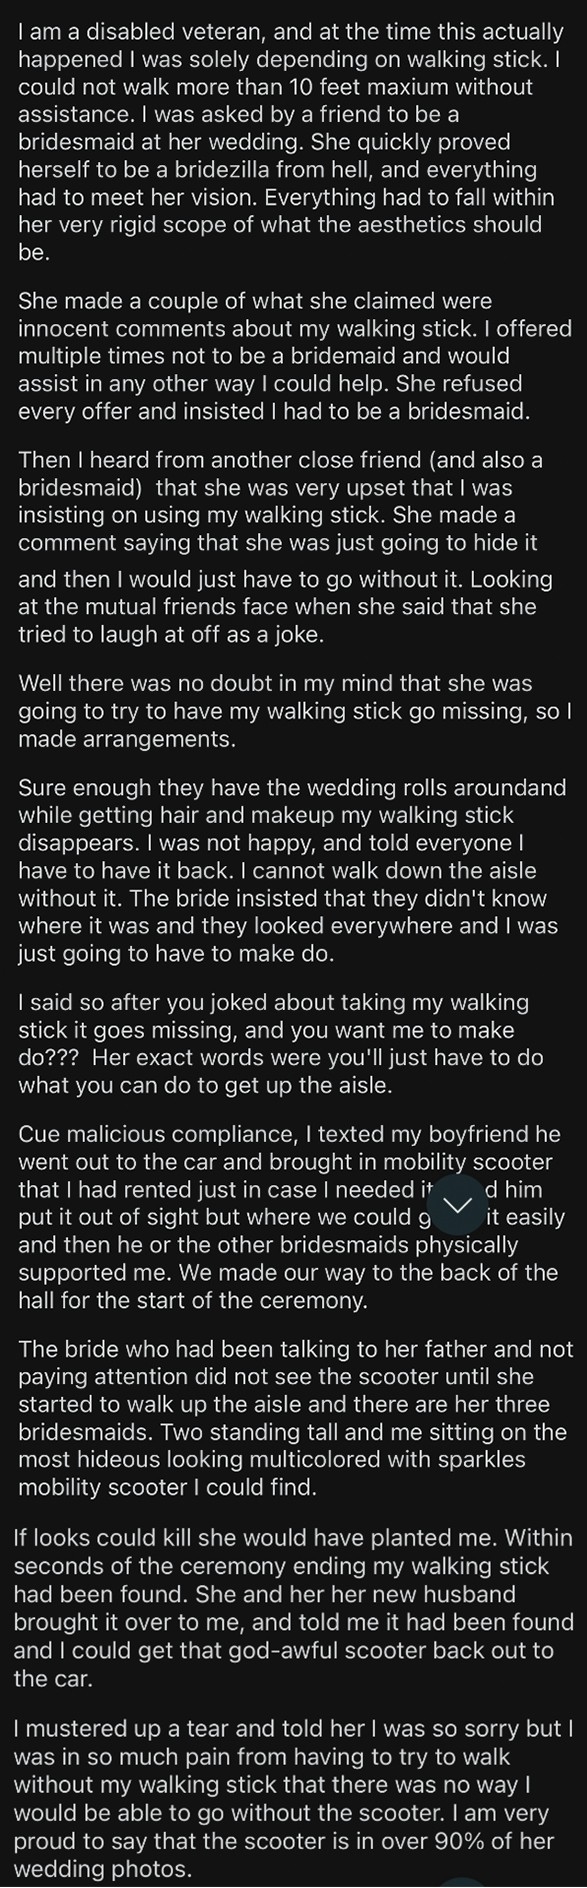 The image is a screenshot of text sharing a personal story. It talks about an individual&#x27;s experiences as a disabled veteran at a wedding